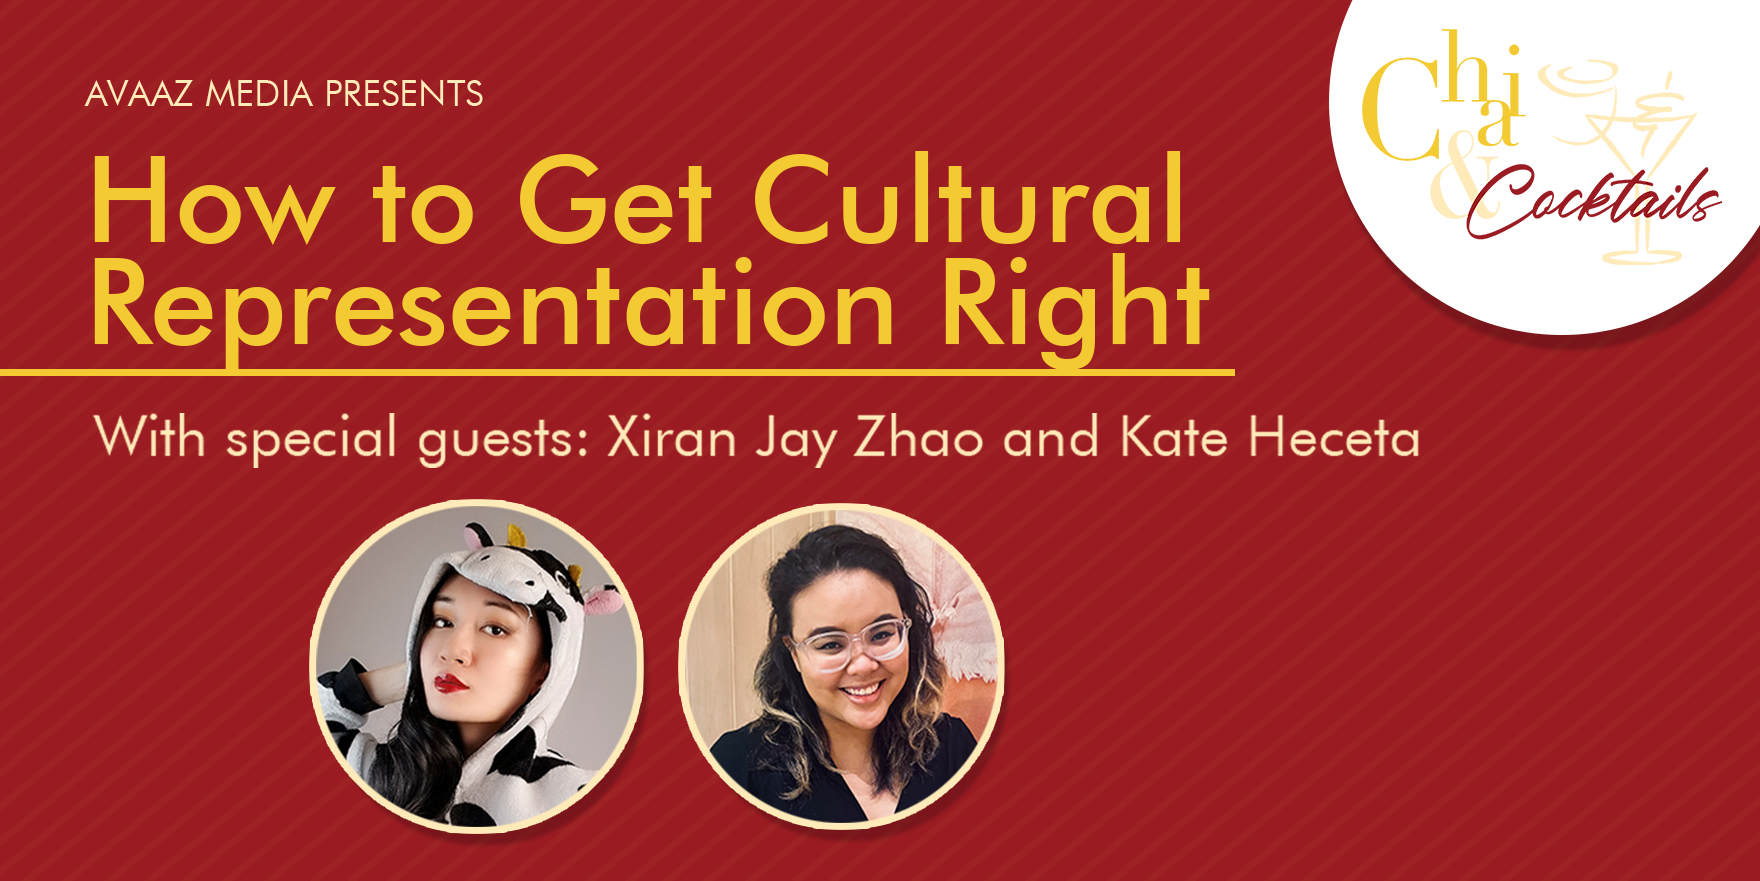 How to Get Cultural Representation Right